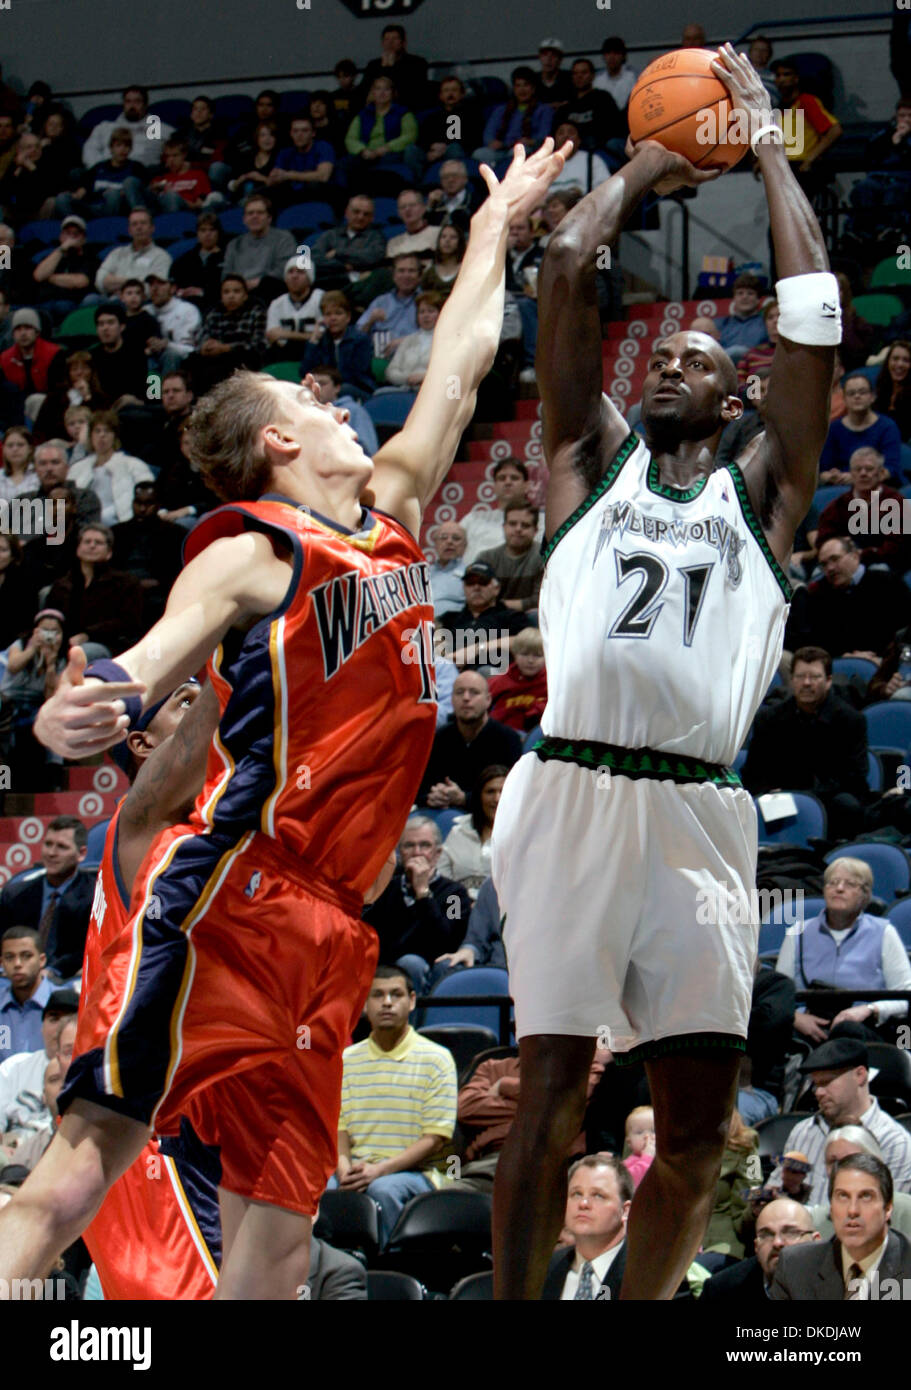 Feb 07, 2007 - Minneapolis, MN, USA - MinnesotaÕs KEVIN GARNETT, (21) attempted a shot while being defended by ANDRIS BIEDRINS, (15) in the first quarter. Stock Photo